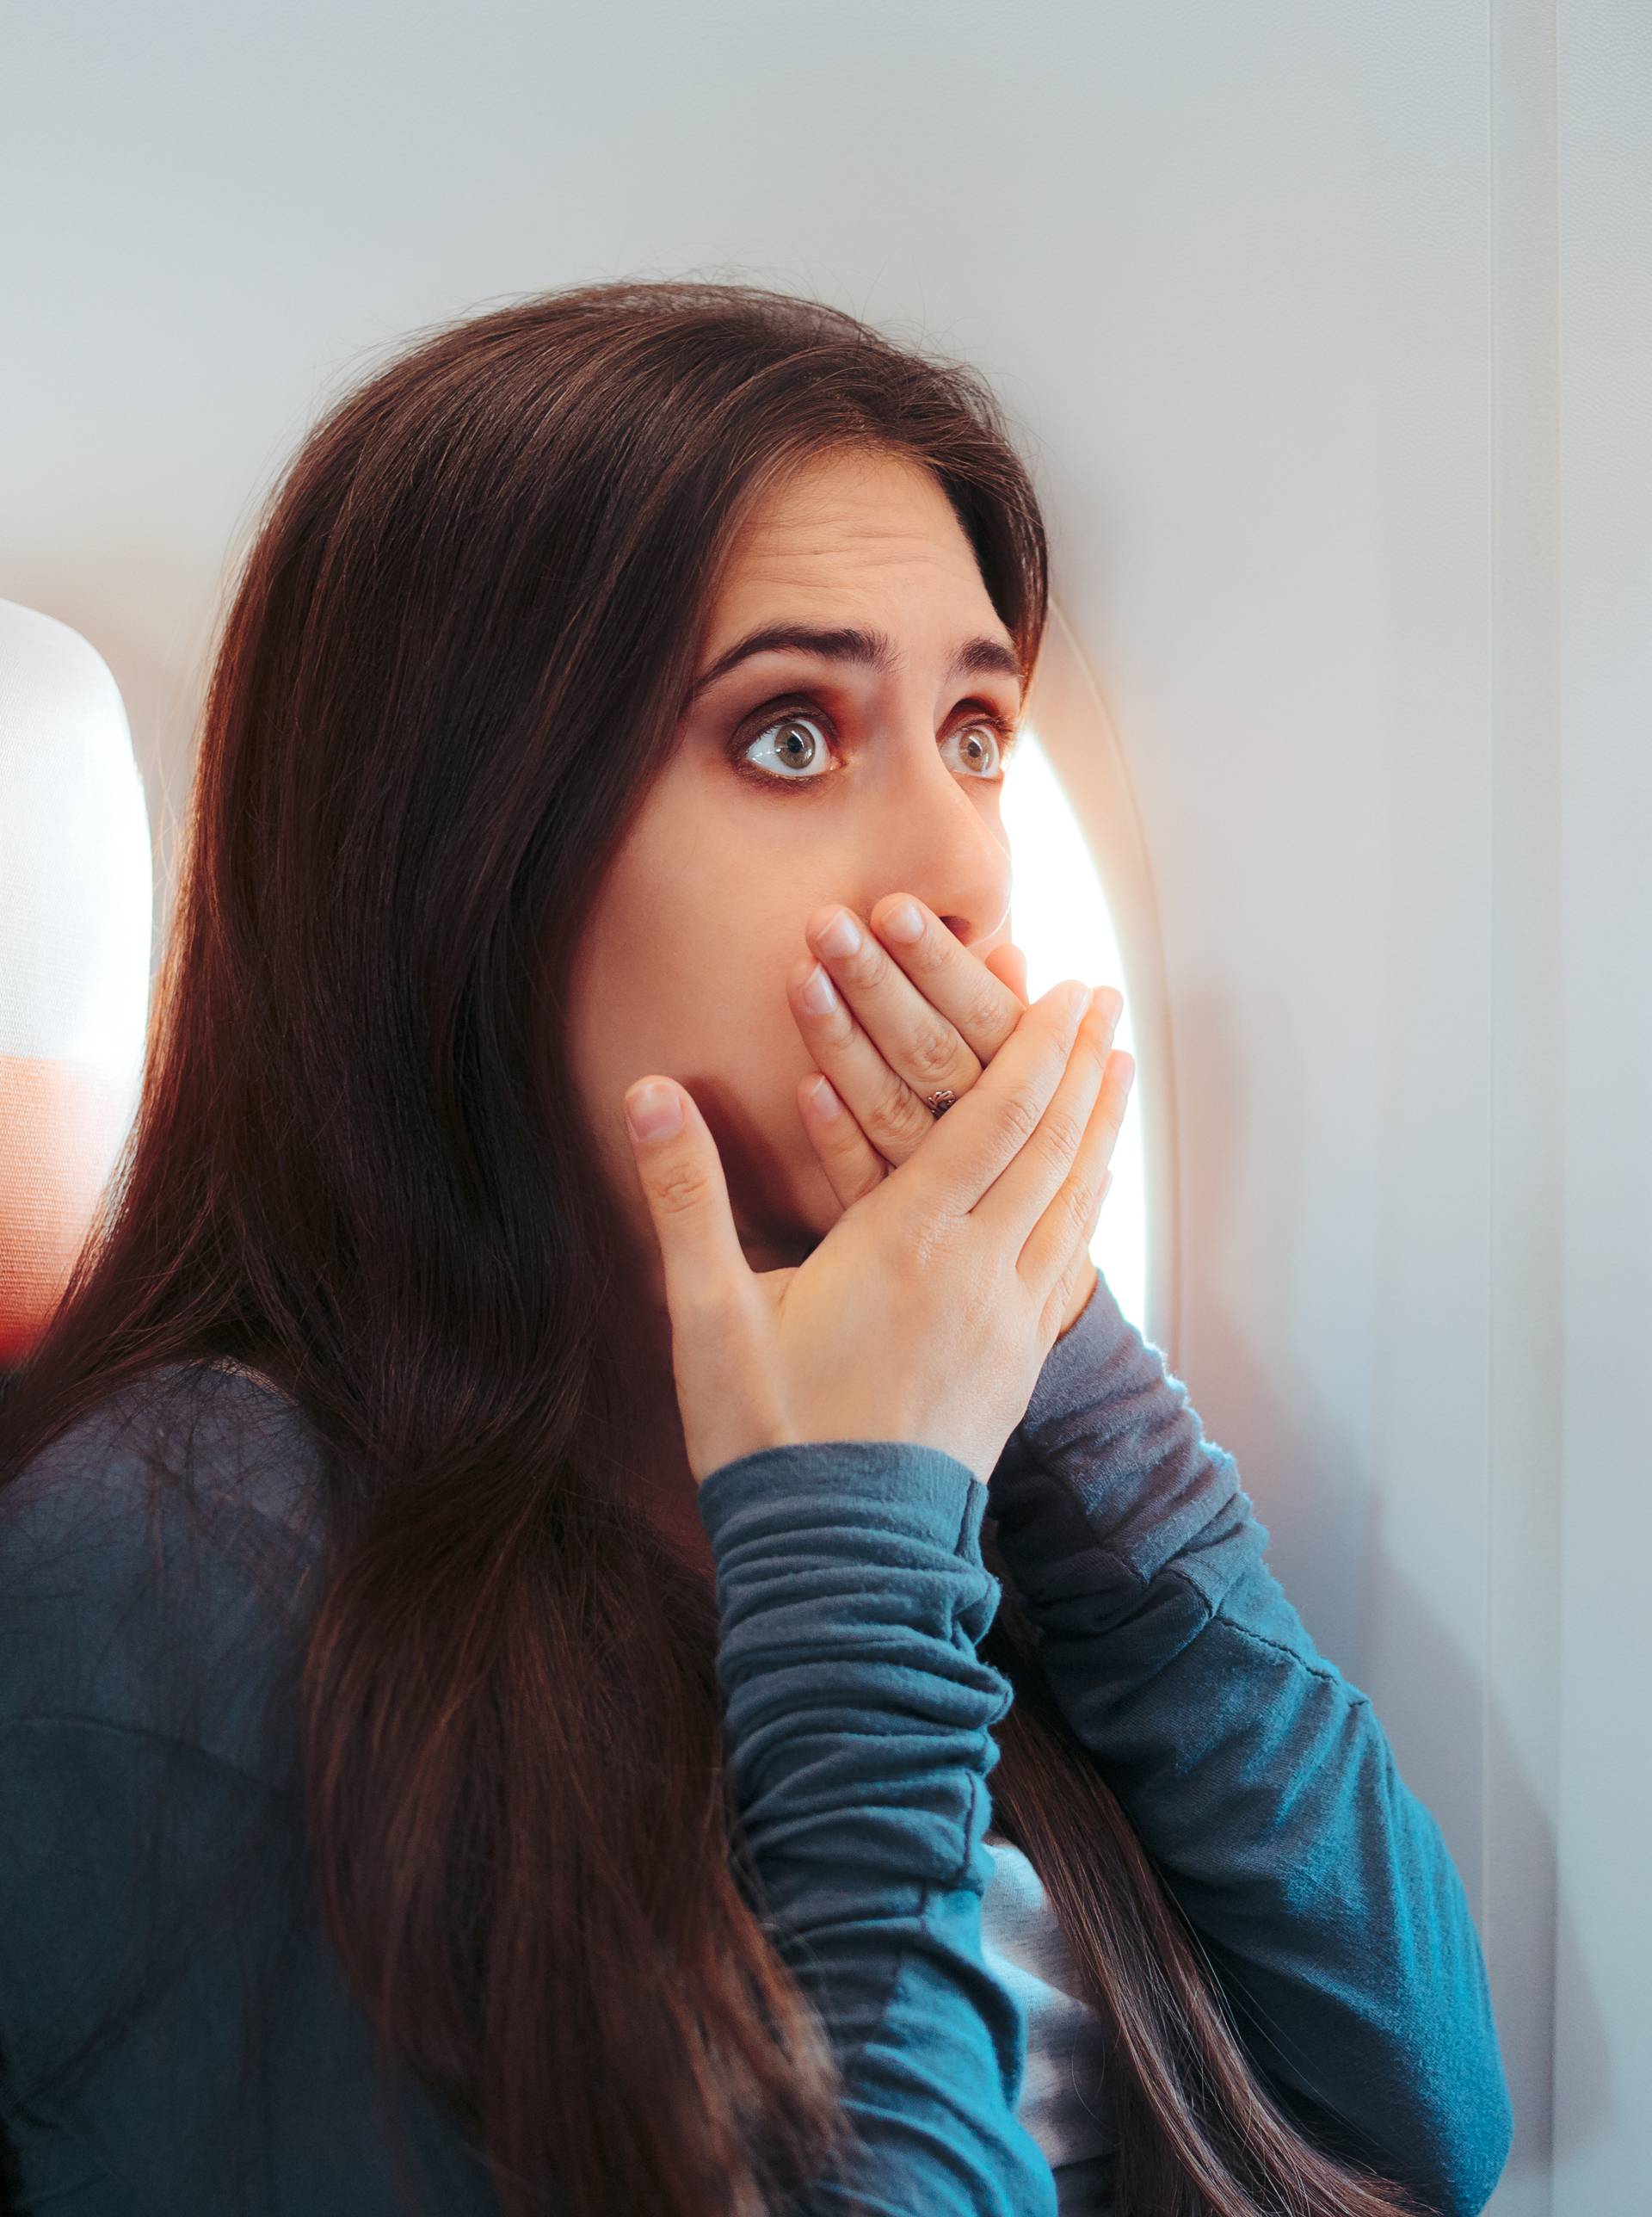 Woman Sitting By the Window on An Airplane Feeling Sick